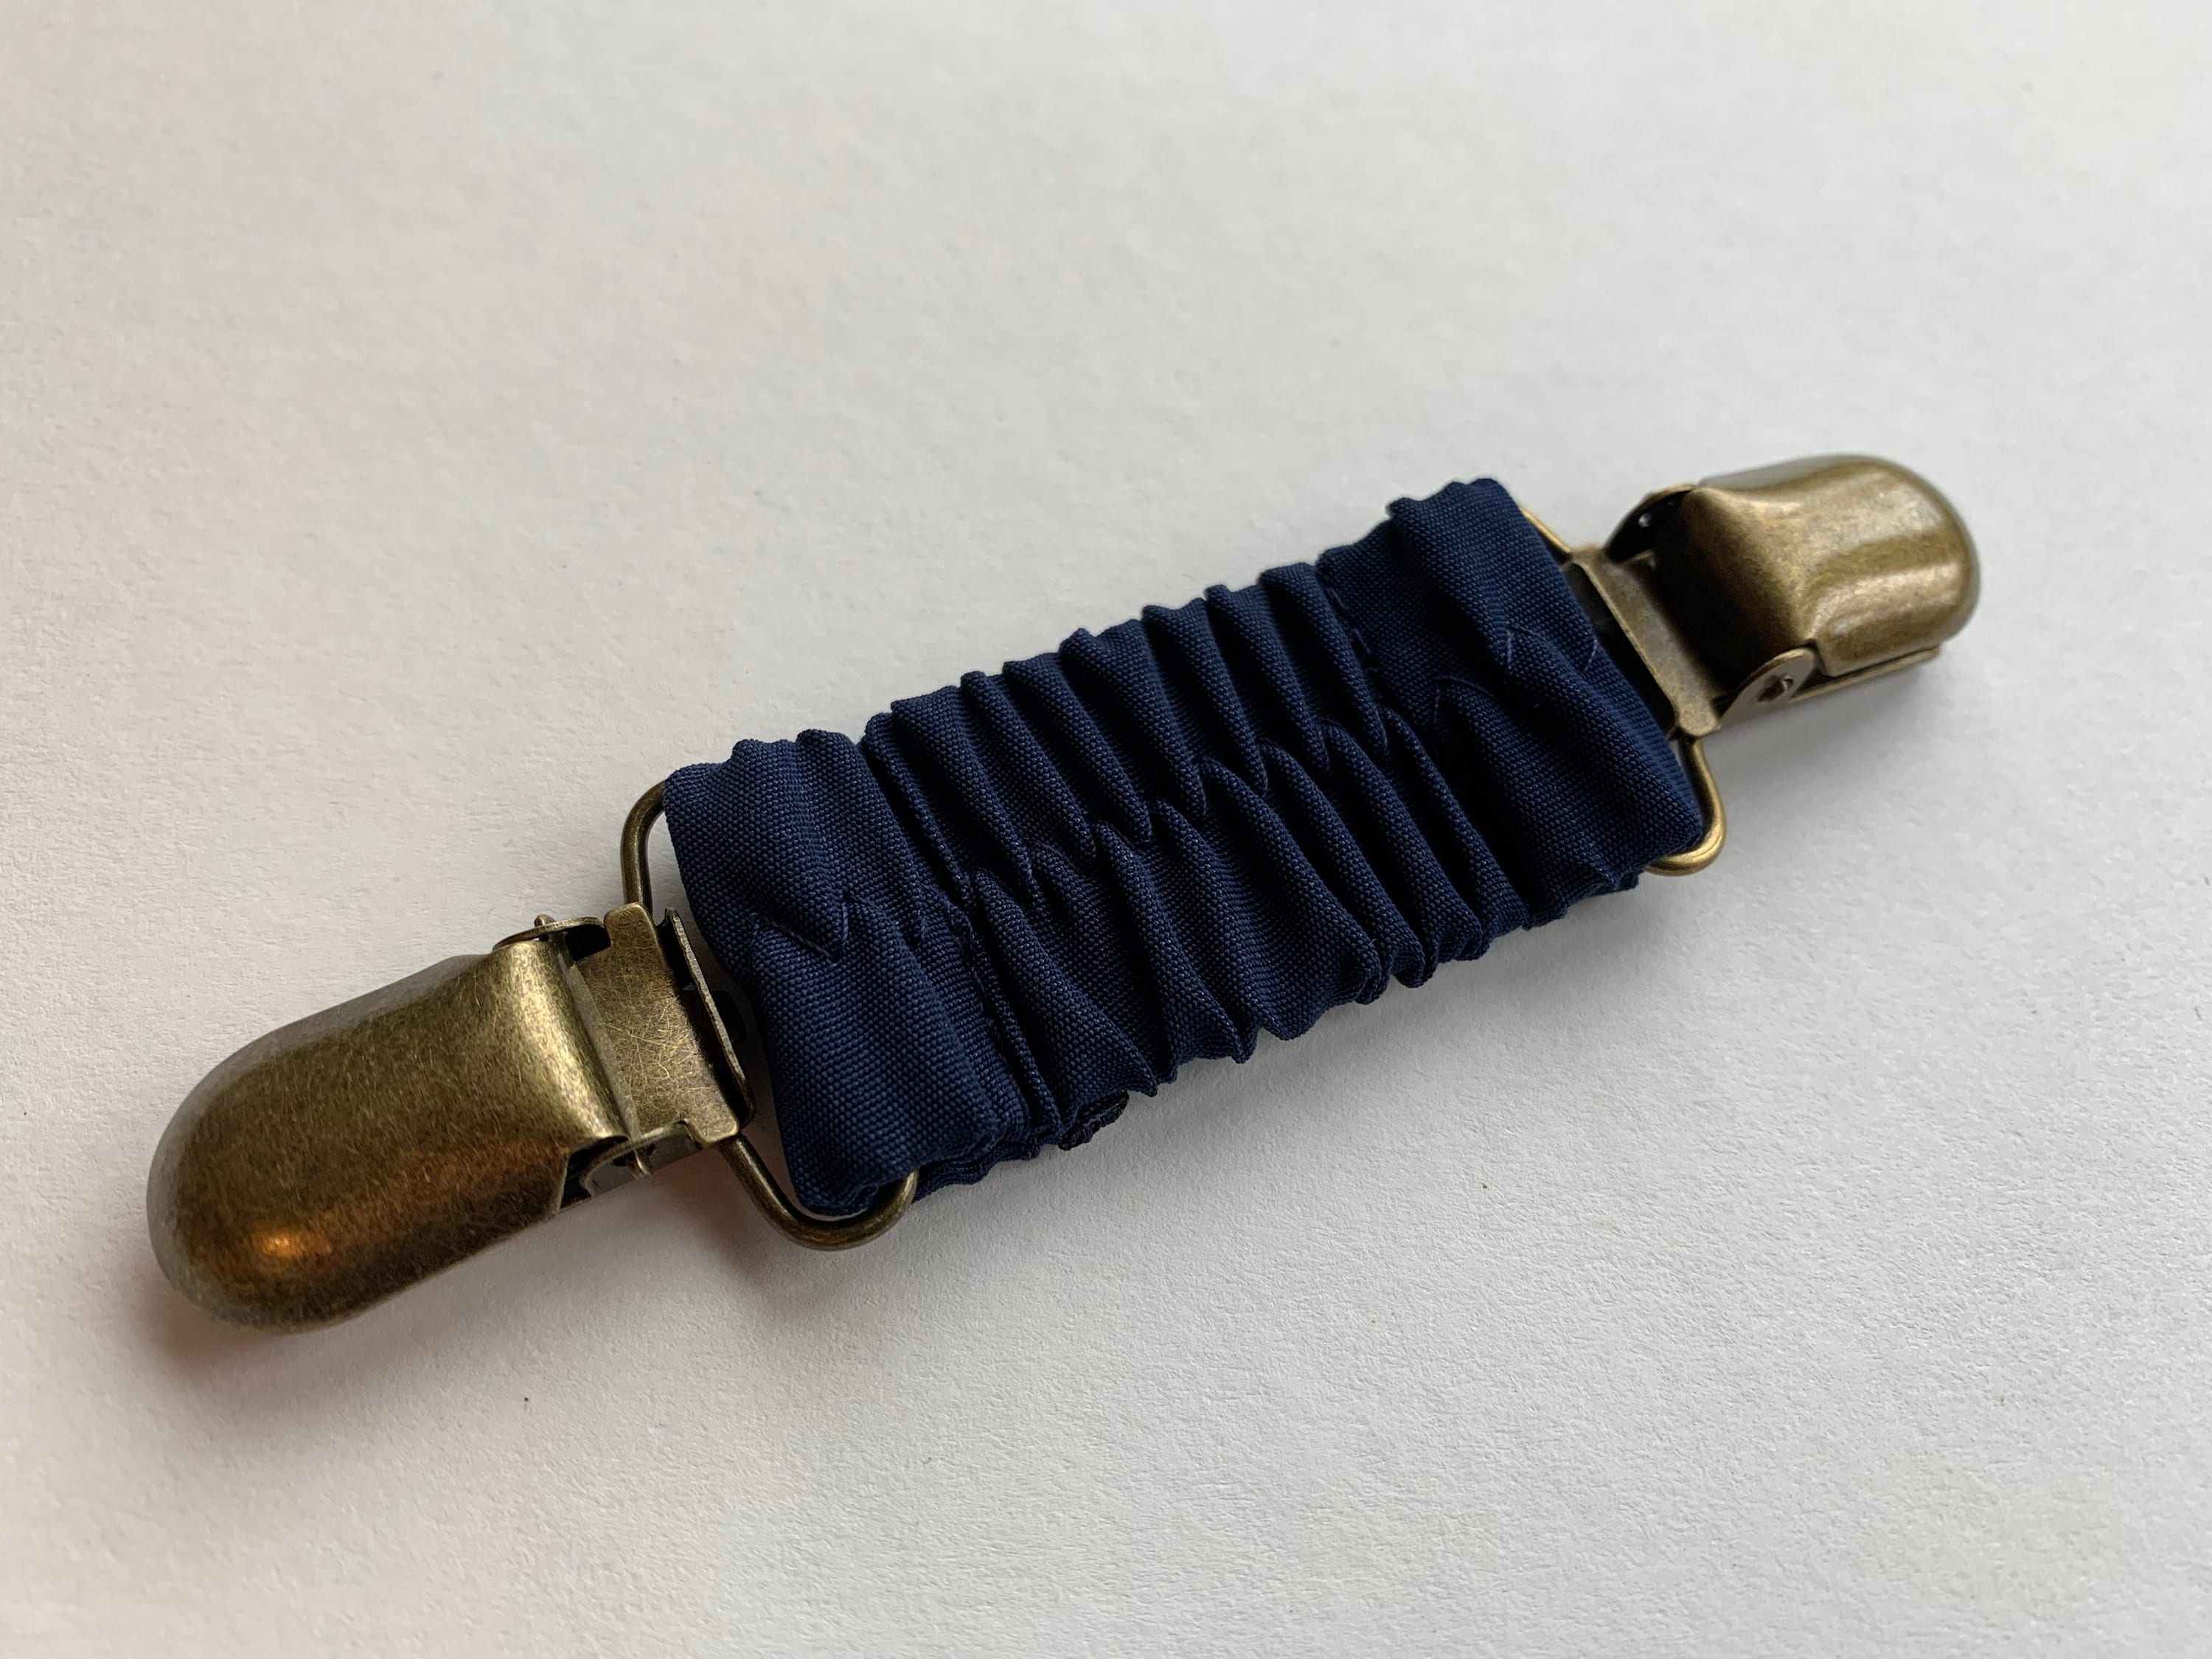 Solid Navy Cinch Clip.clothing Cinch Clip, Sweater Clip, Dress Clip.  Fastener Accessory for Loose Shirts. Stretchy Clasp for Tailored Look 